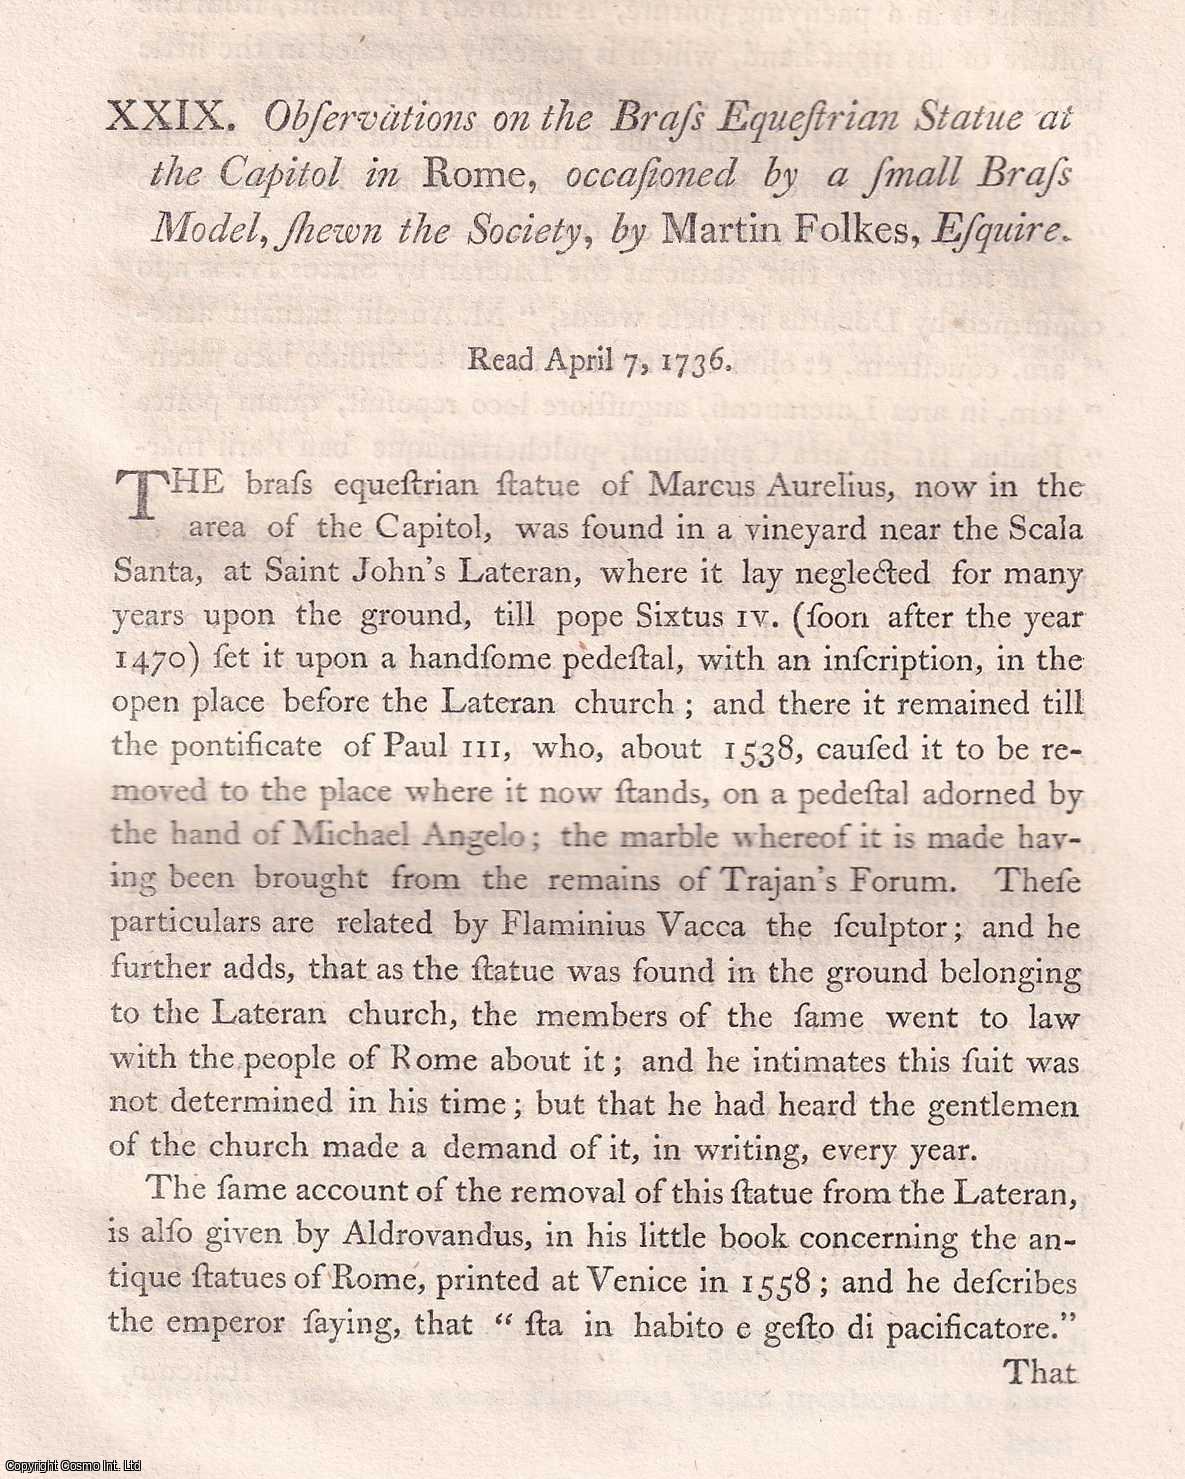 Martin Folkes, Esquire. - Observations on the Brass Equestrian Statue at the Capitol in Rome, occasioned by a small Brass Model, shewn the Society. An uncommon original article from the journal Archaeologia, 1770.